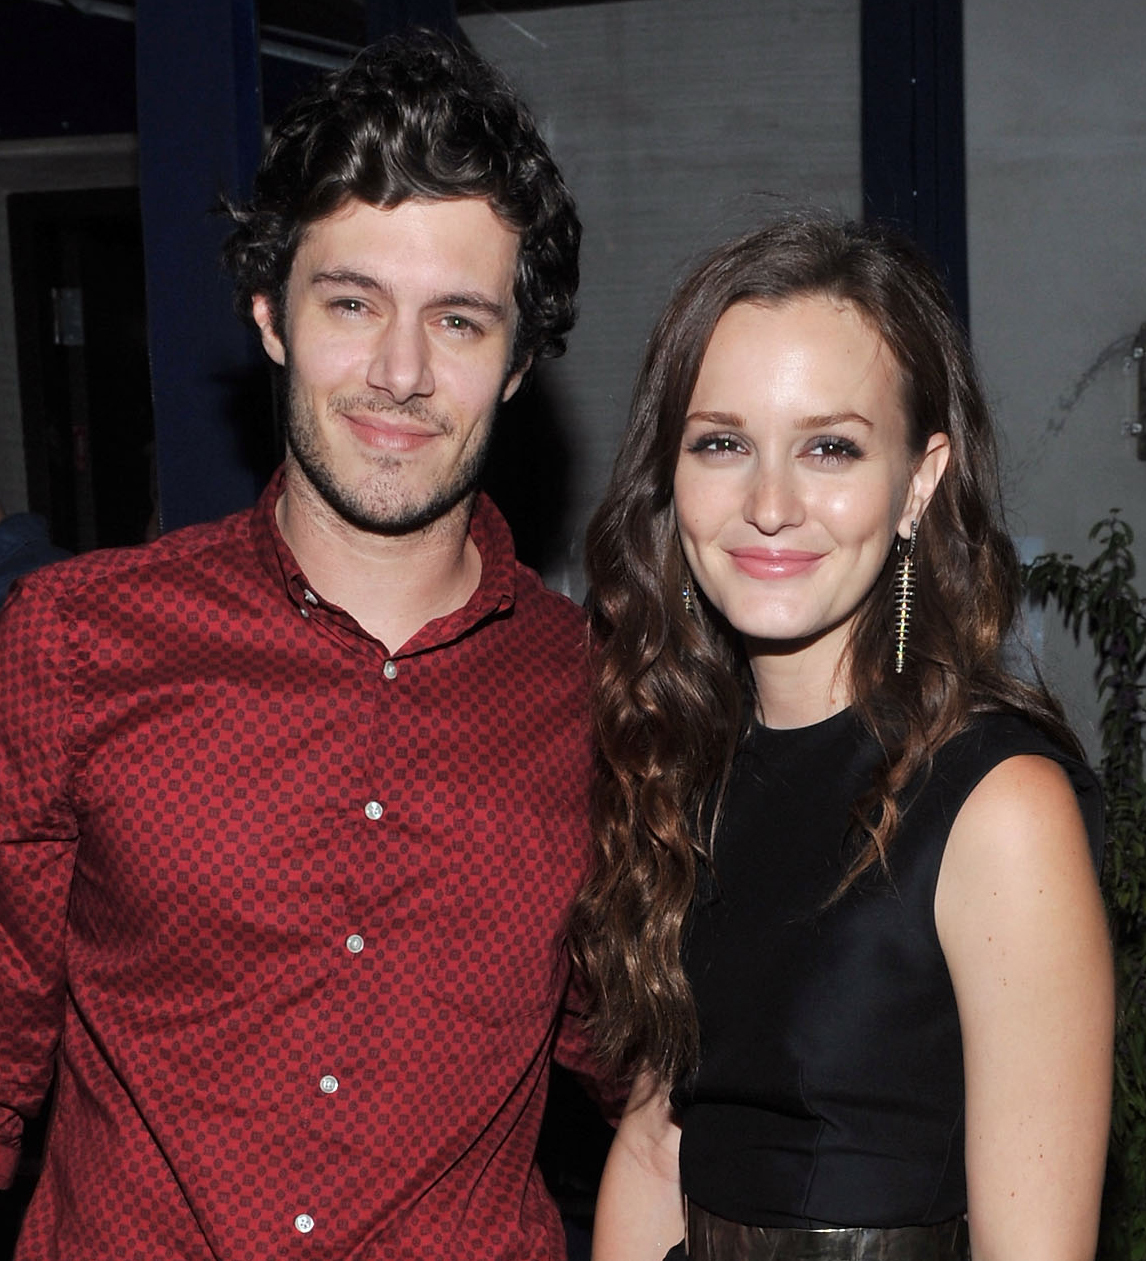 <p>A lot of people think Adam Brody met Leighton Meester on the set of their 2011 film "The Oranges." But it turns out they connected long before that -- though it was hardly romantic. On a March 2021 episode of Anna Faris's "Unqualified" podcast, as reported by <a href="http://www.justjared.com/2021/03/30/adam-brody-reveals-what-he-loves-most-about-leighton-meester-in-rare-comments-about-her/?=morehere">Just Jared</a>, Adam explained that he and Leighton met by chance at famed Los Angeles eatery Canter's Deli around 2006 -- just before his hit show "The O.C." came to an end and Leighton's big series "Gossip Girl" debuted. "Josh Schwartz produced both shows and literally the first time we met, that whole cast was eating at Canter's and I lived at Canter's for like, my entire 20s. And I was leaving, and he introduced all of us," Adam explained. He and Leighton then "bumped into" each other a few times over the next few years before both were cast in "The Oranges." "We did this movie together. I was seeing someone at the time… So we met kind of through mutual work friends off and on. And then we didn't get together [until] about a year after that movie, when I was single," he said. Still, Adam admitted, "I was very attracted to her from the jump. She's a heavenly creature. I thought she was gorgeous. And even when we did the movie, there was chemistry there, but I was seeing someone." When he became single again, he wasn't sure what to do. "I had no idea whether [Leighton] was a good person or not. And, in fact, kind of assumed she probably wasn't for like the first handful of years that I didn't know her, just because, I don't know, 'Gossip Girl.'" He soon realized he was wrong. "I was like, 'Oh, she's cool.' But I still didn't know, and that continued even to when we first started dating… And come to find out she's literally like Joan of Arc," Adam said. "She is the strongest, best person I know. She is my moral compass and North Star, and I just can't say enough good things about her character. It's crazy." They married in 2014 and now have two kids.</p>